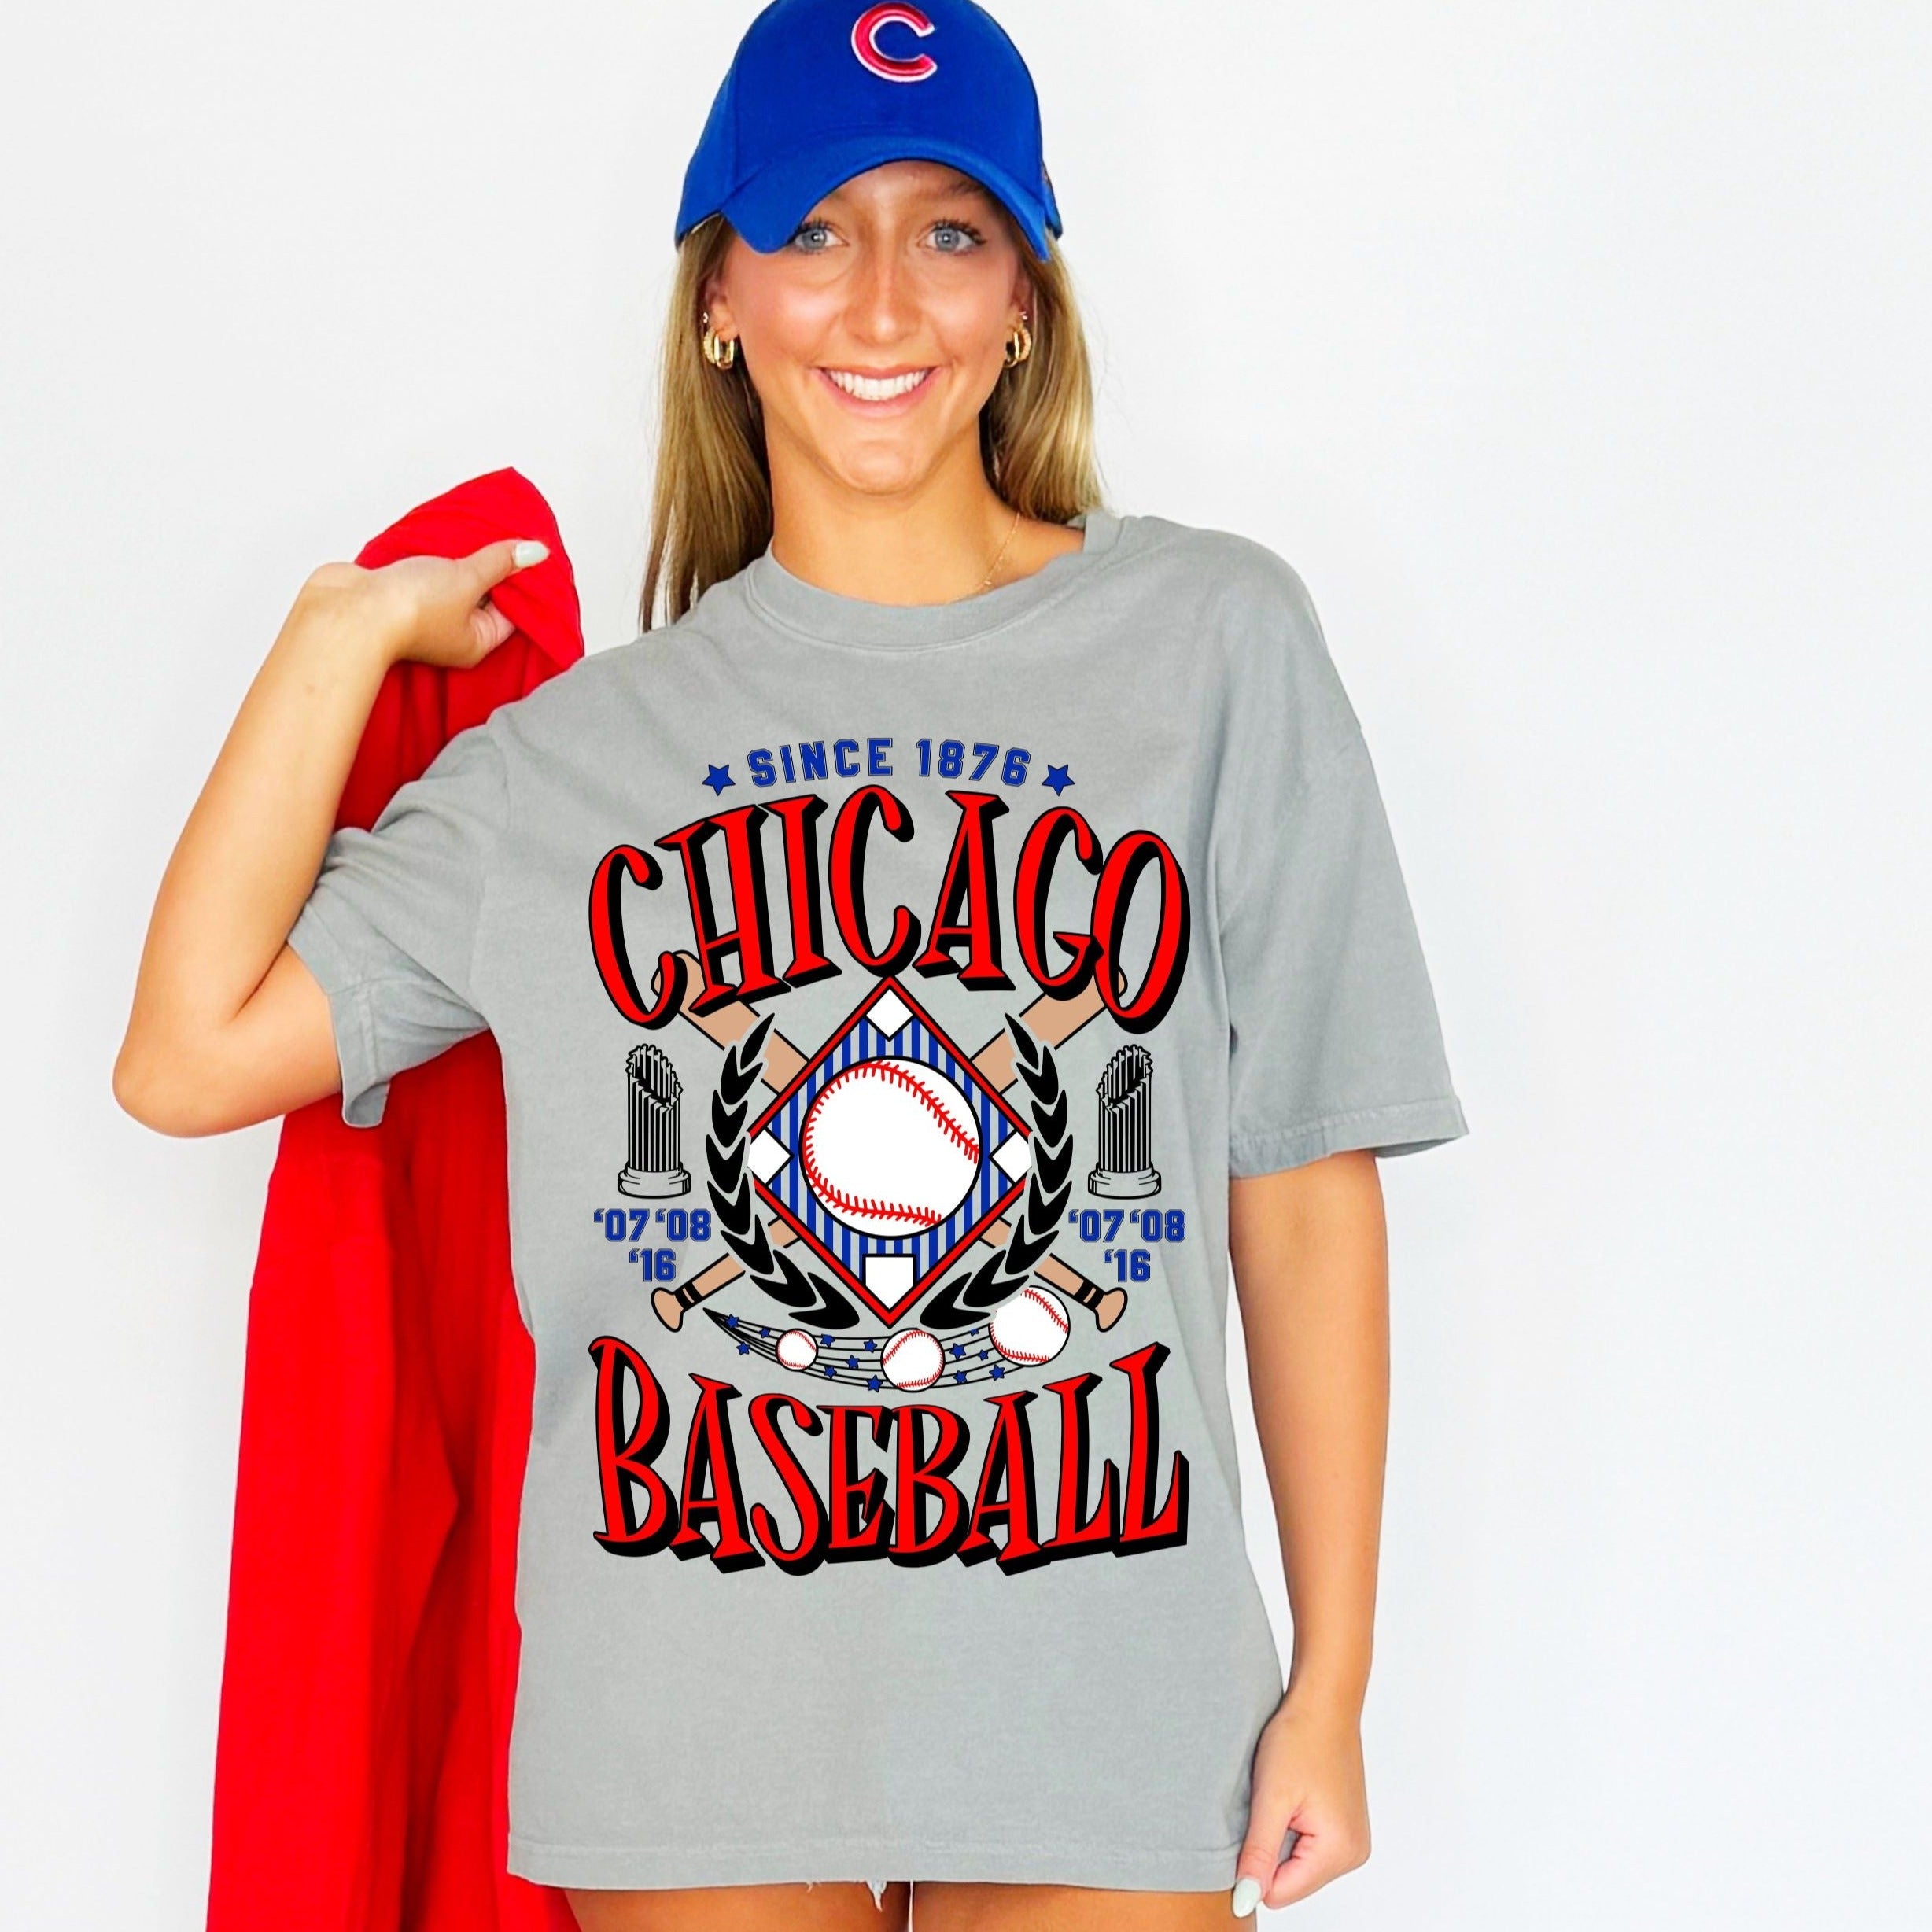 Chicago Cubs Inspired Baseball Team Youth & Adult tee